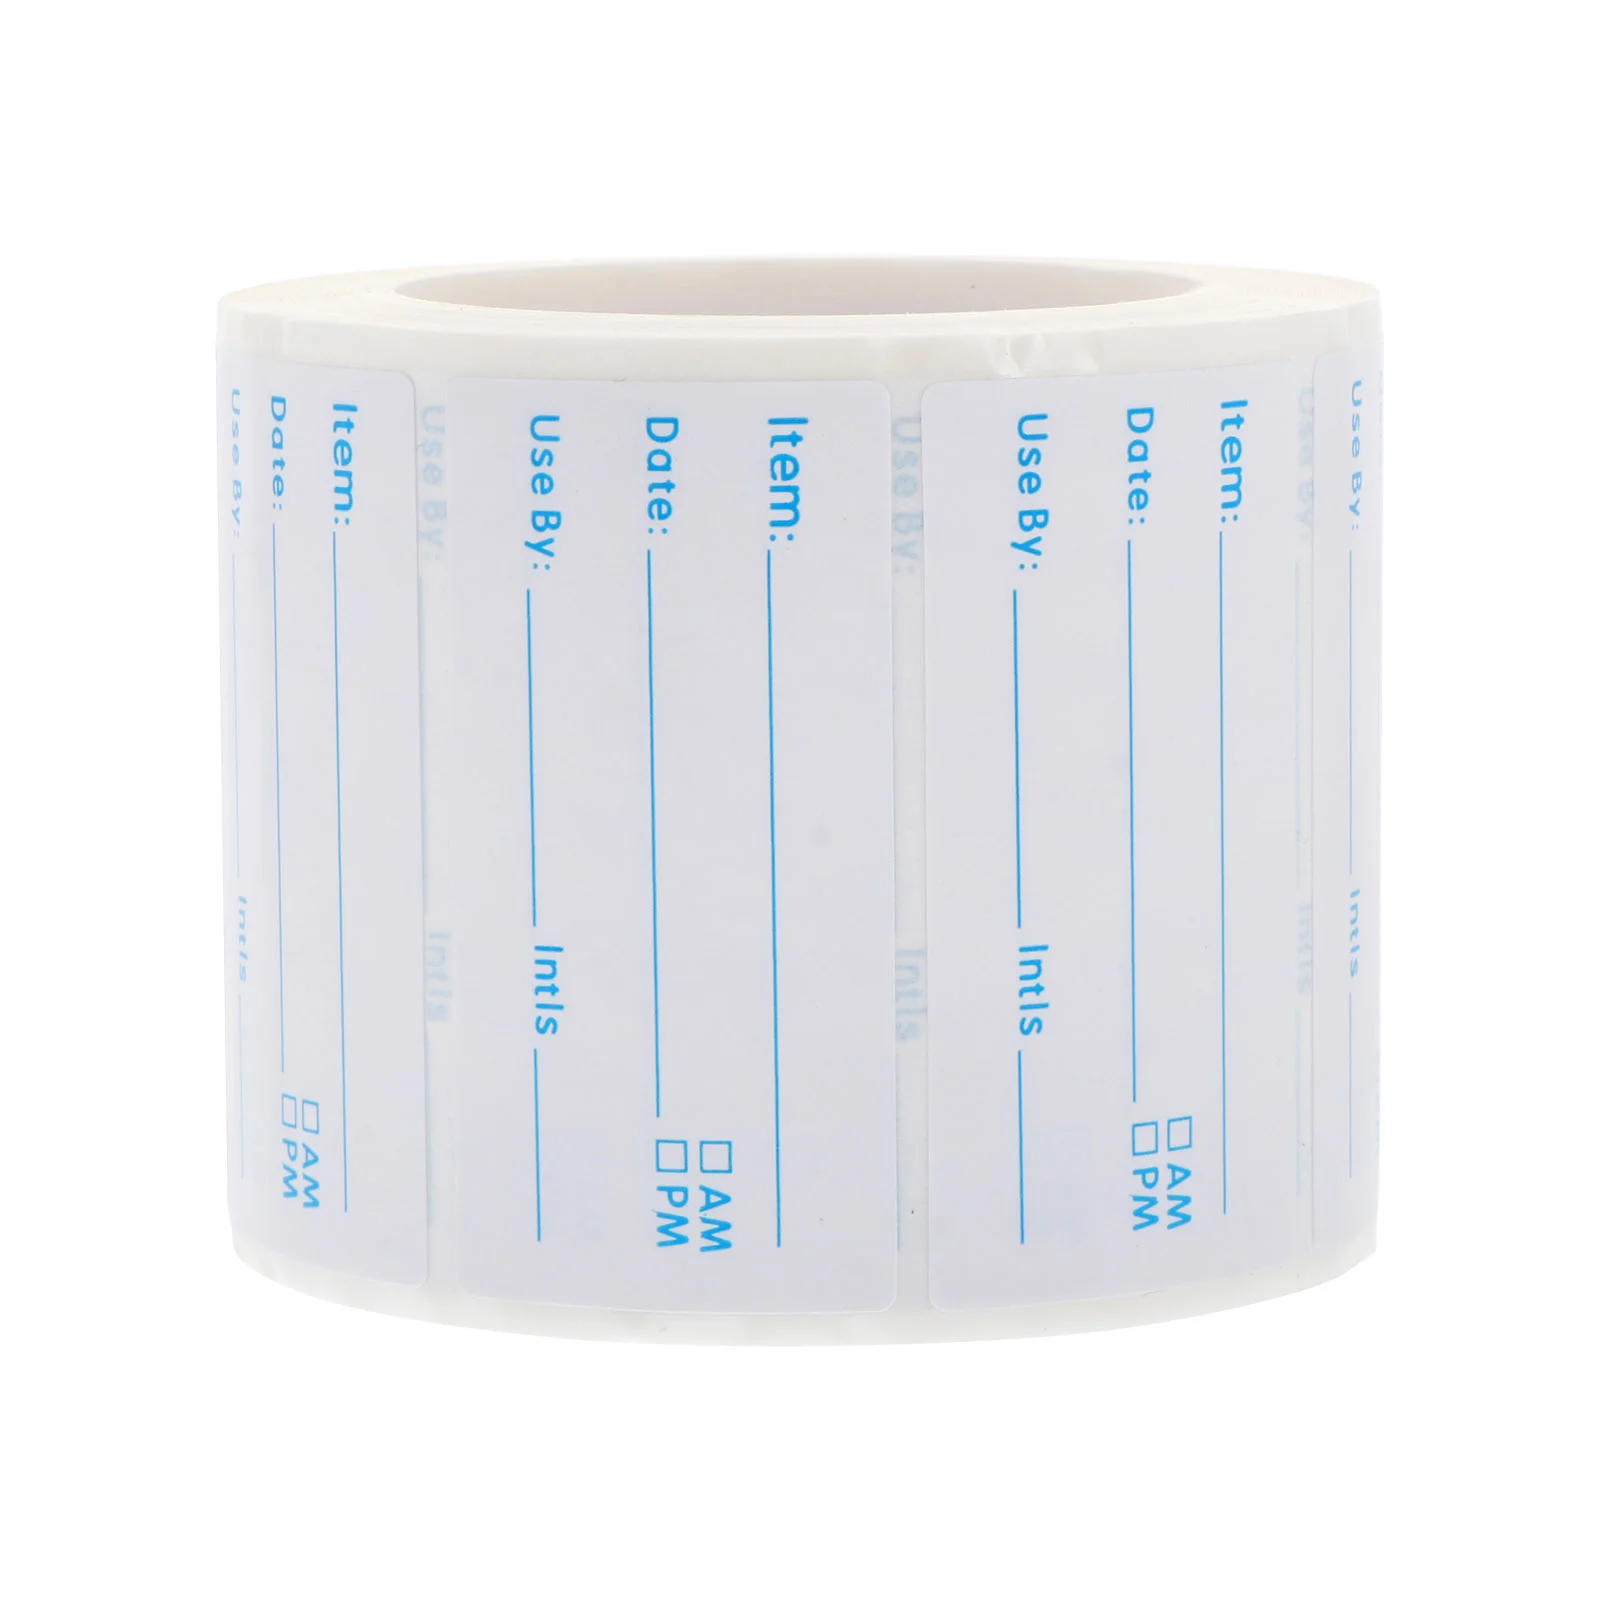 

Labels Foodstickers Storage Sticker Containers Date Restaurant Track Andlabel Safety Expiration Container Supplies Marked Day